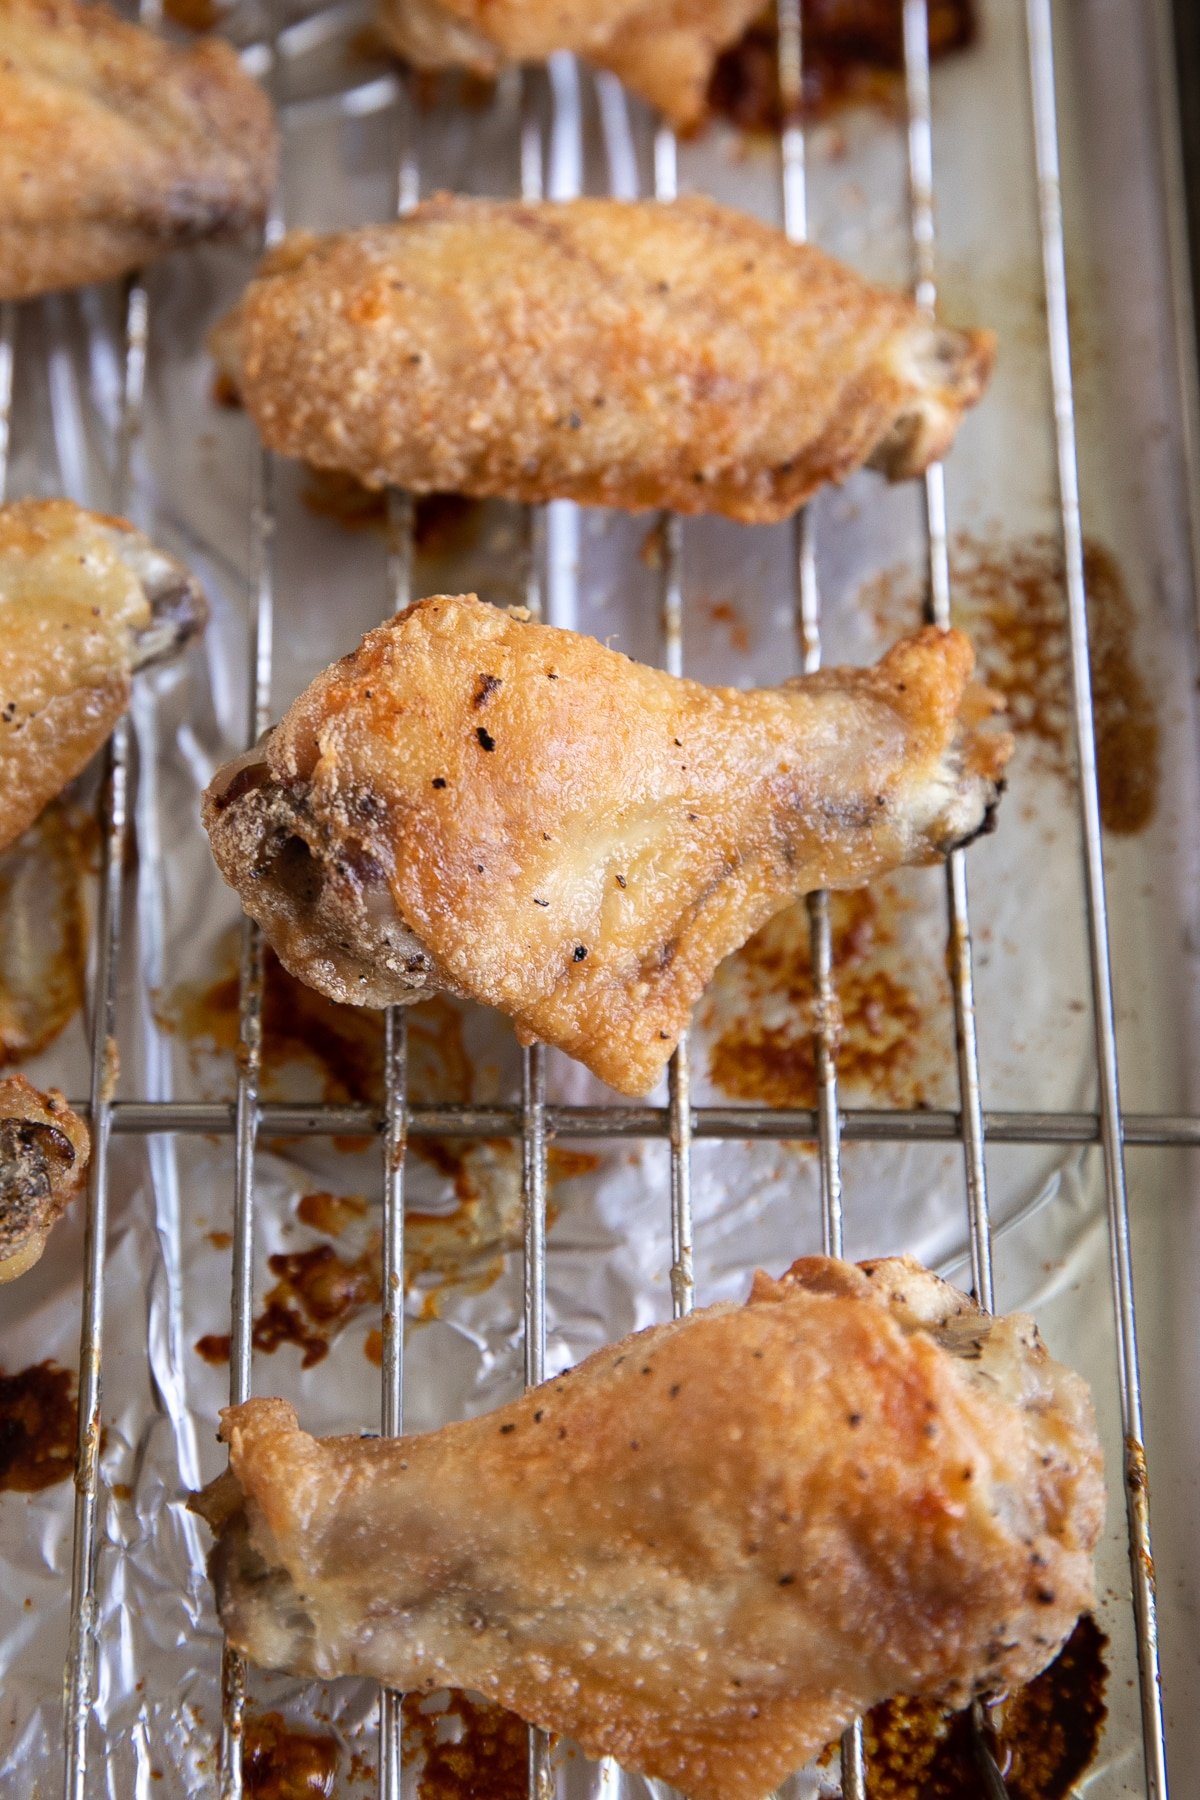 Image of crispy baked chicken wings on a wire baking rack before being tossed in homemade buffalo sauce.